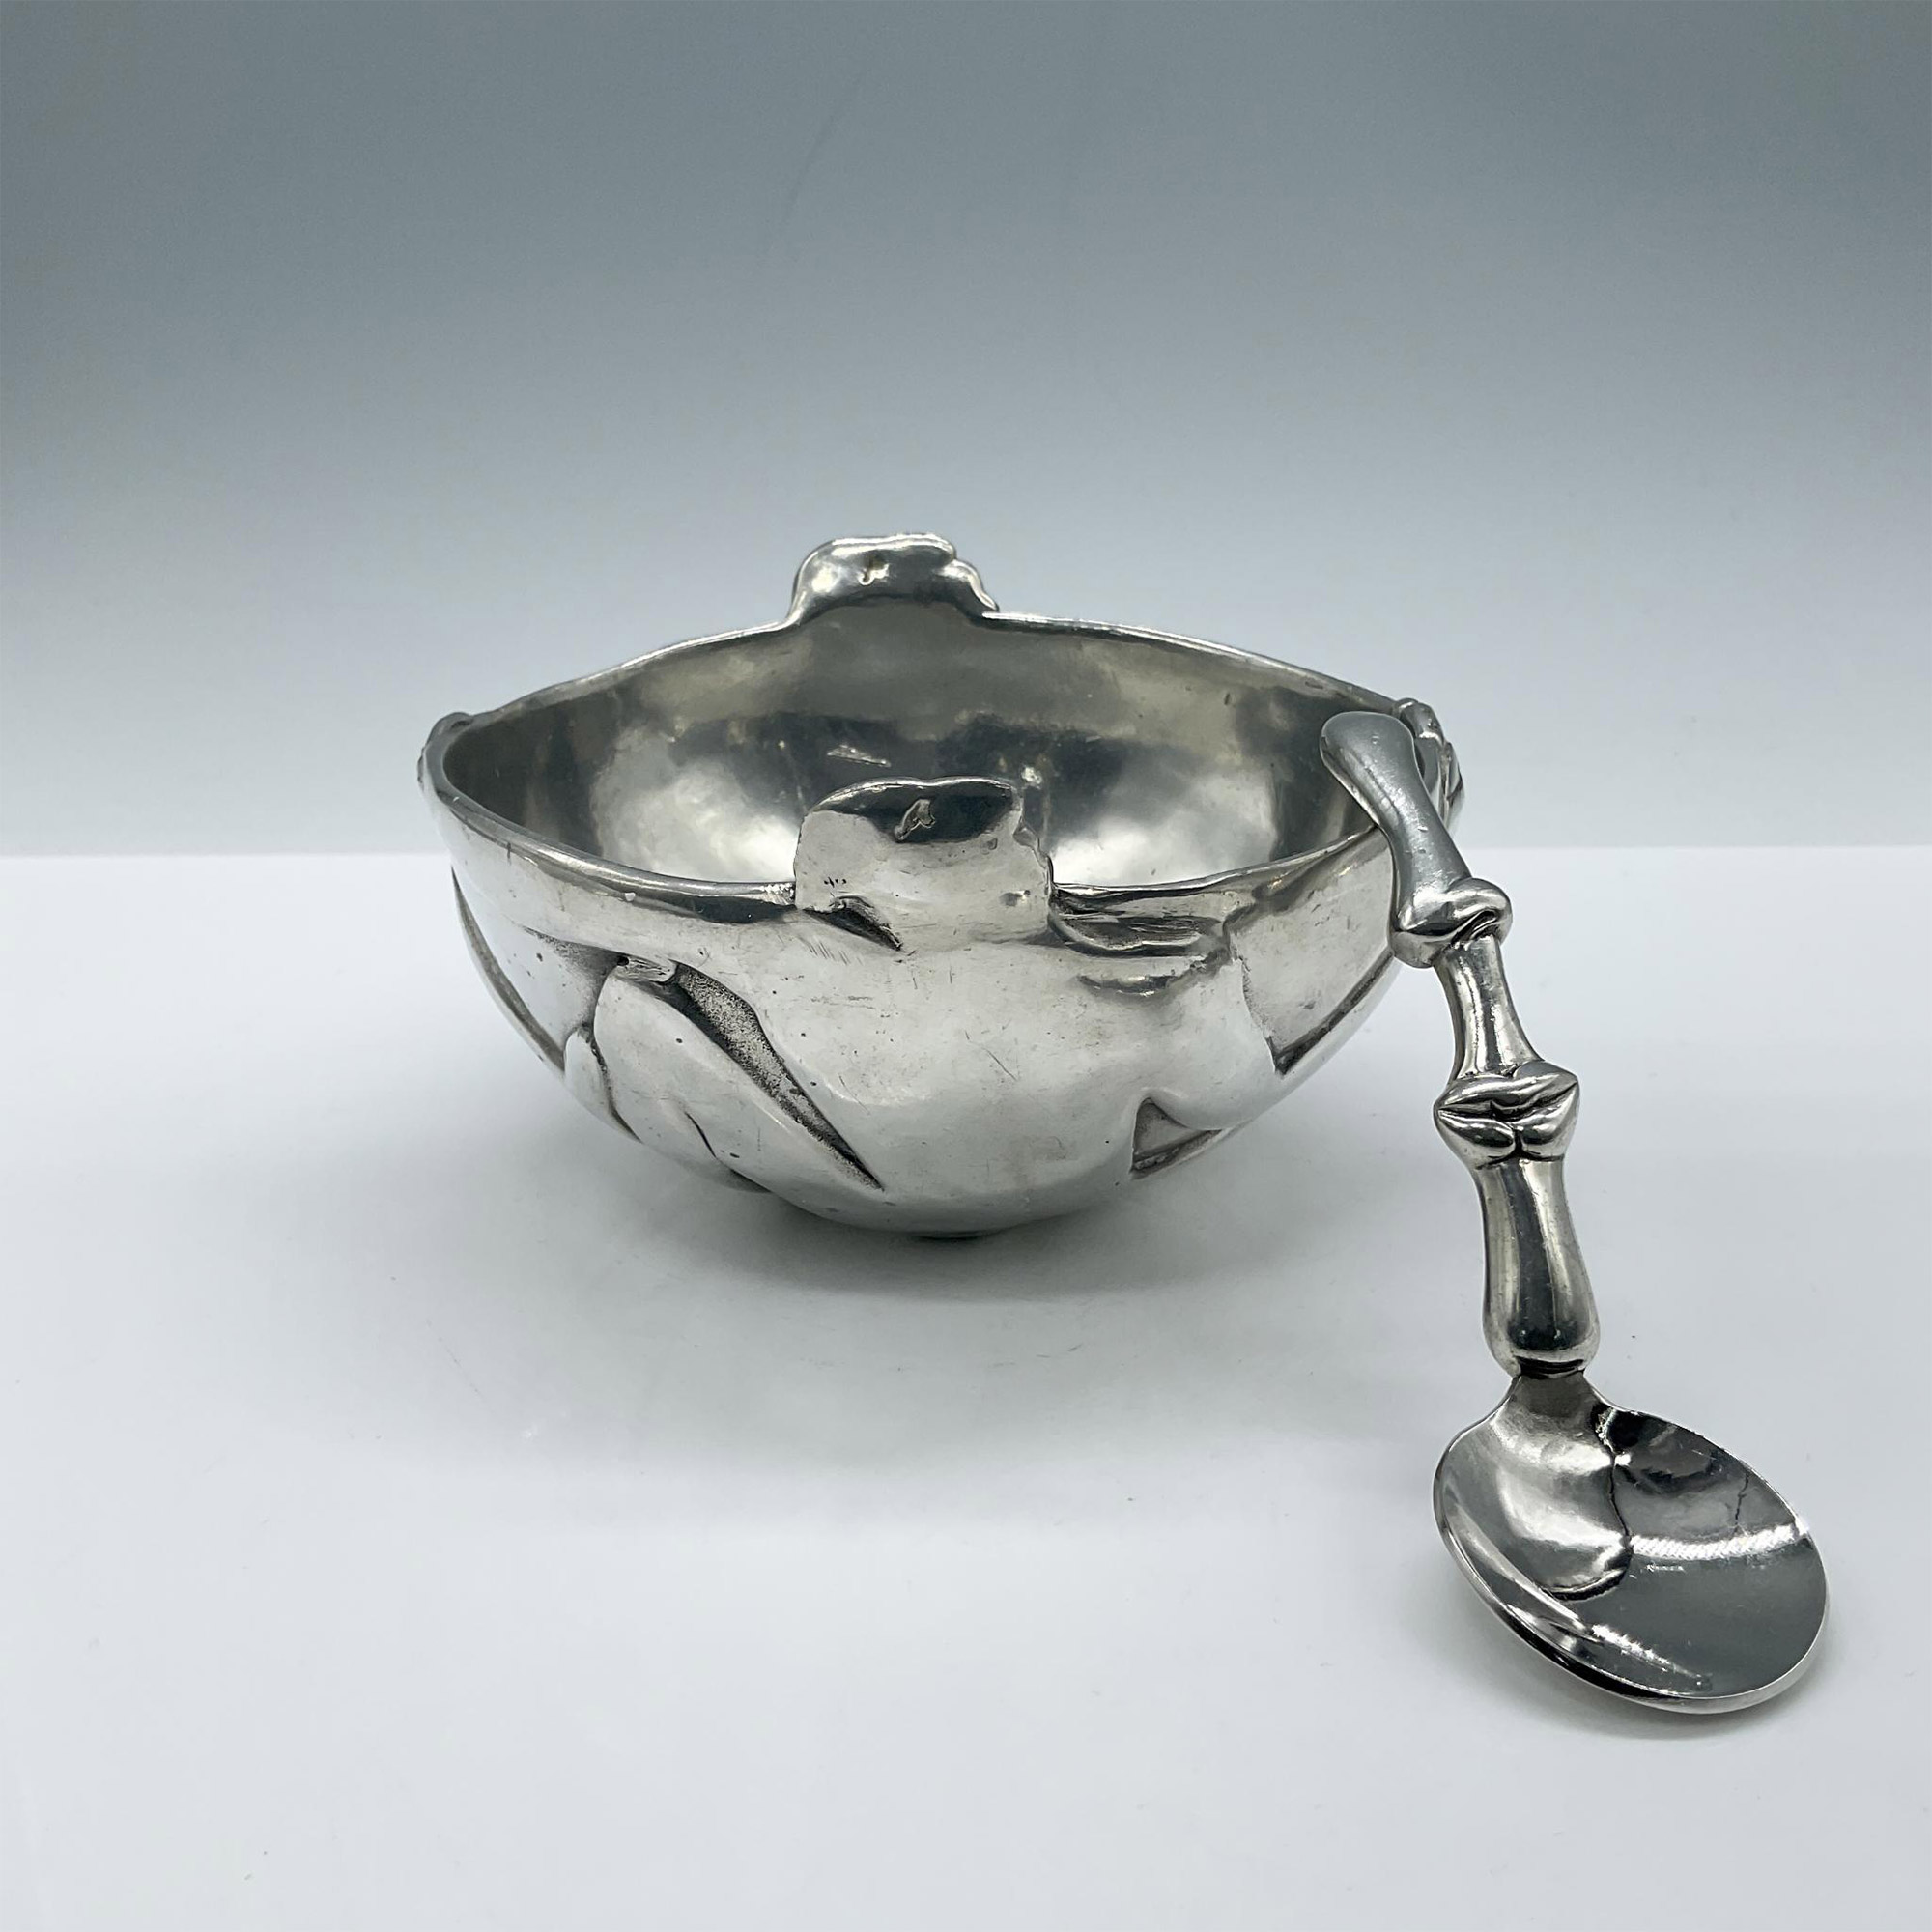 2pc Carrol Boyes Figural Pewter Bowl and Spoon - Image 2 of 5